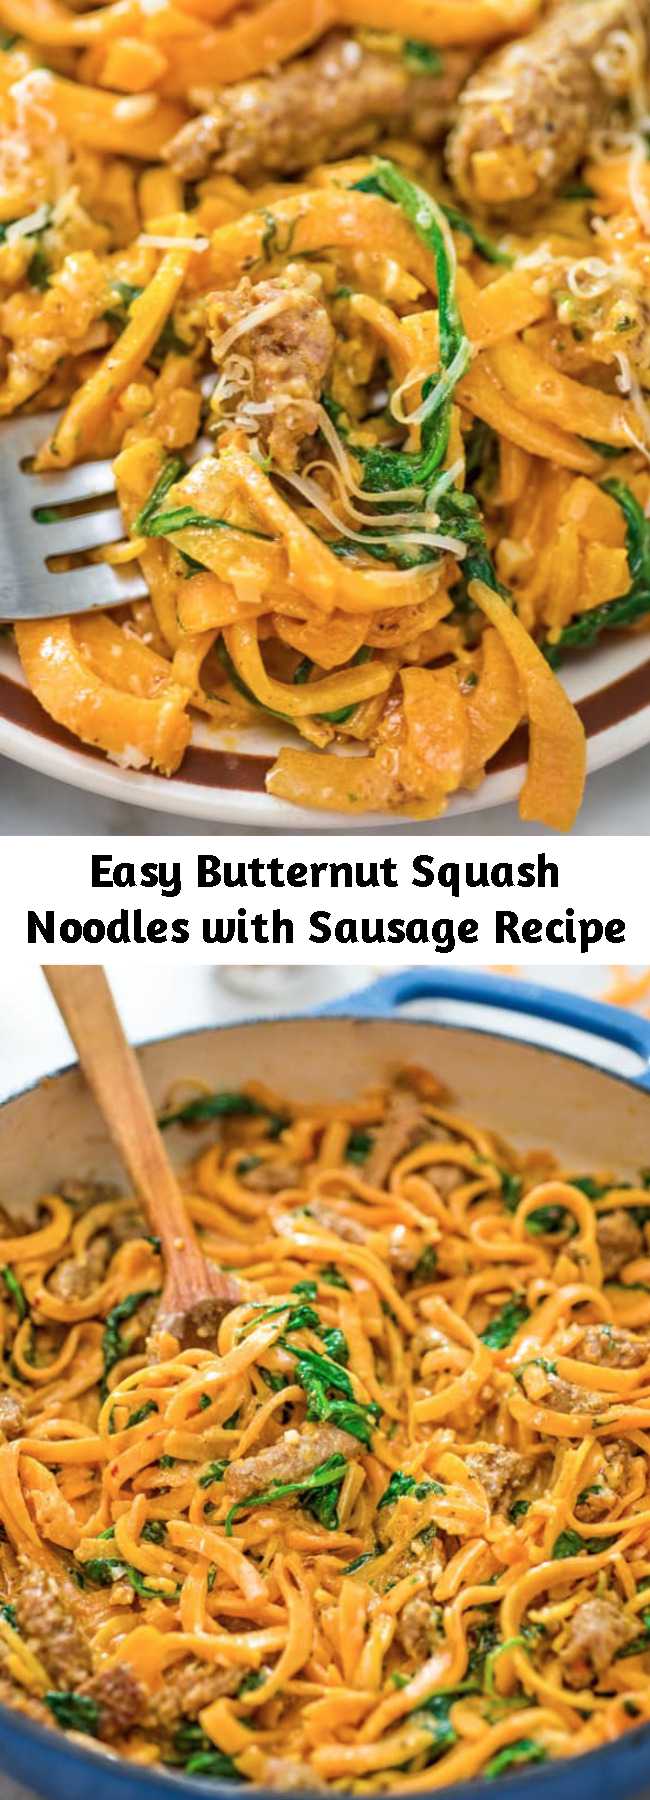 Easy Butternut Squash Noodles with Sausage Recipe - You are going to fall in love with these Butternut Squash Noodles with Sausage! Made with Italian sausage, spinach, spiralized butternut squash, garlic, cream, and Parmesan cheese, this dish is just bursting with flavors! #spiralizer #spiralized #butternutsquash #spiralizerrecipes #dinner #lunch #recipeoftheday #videorecipe #winter